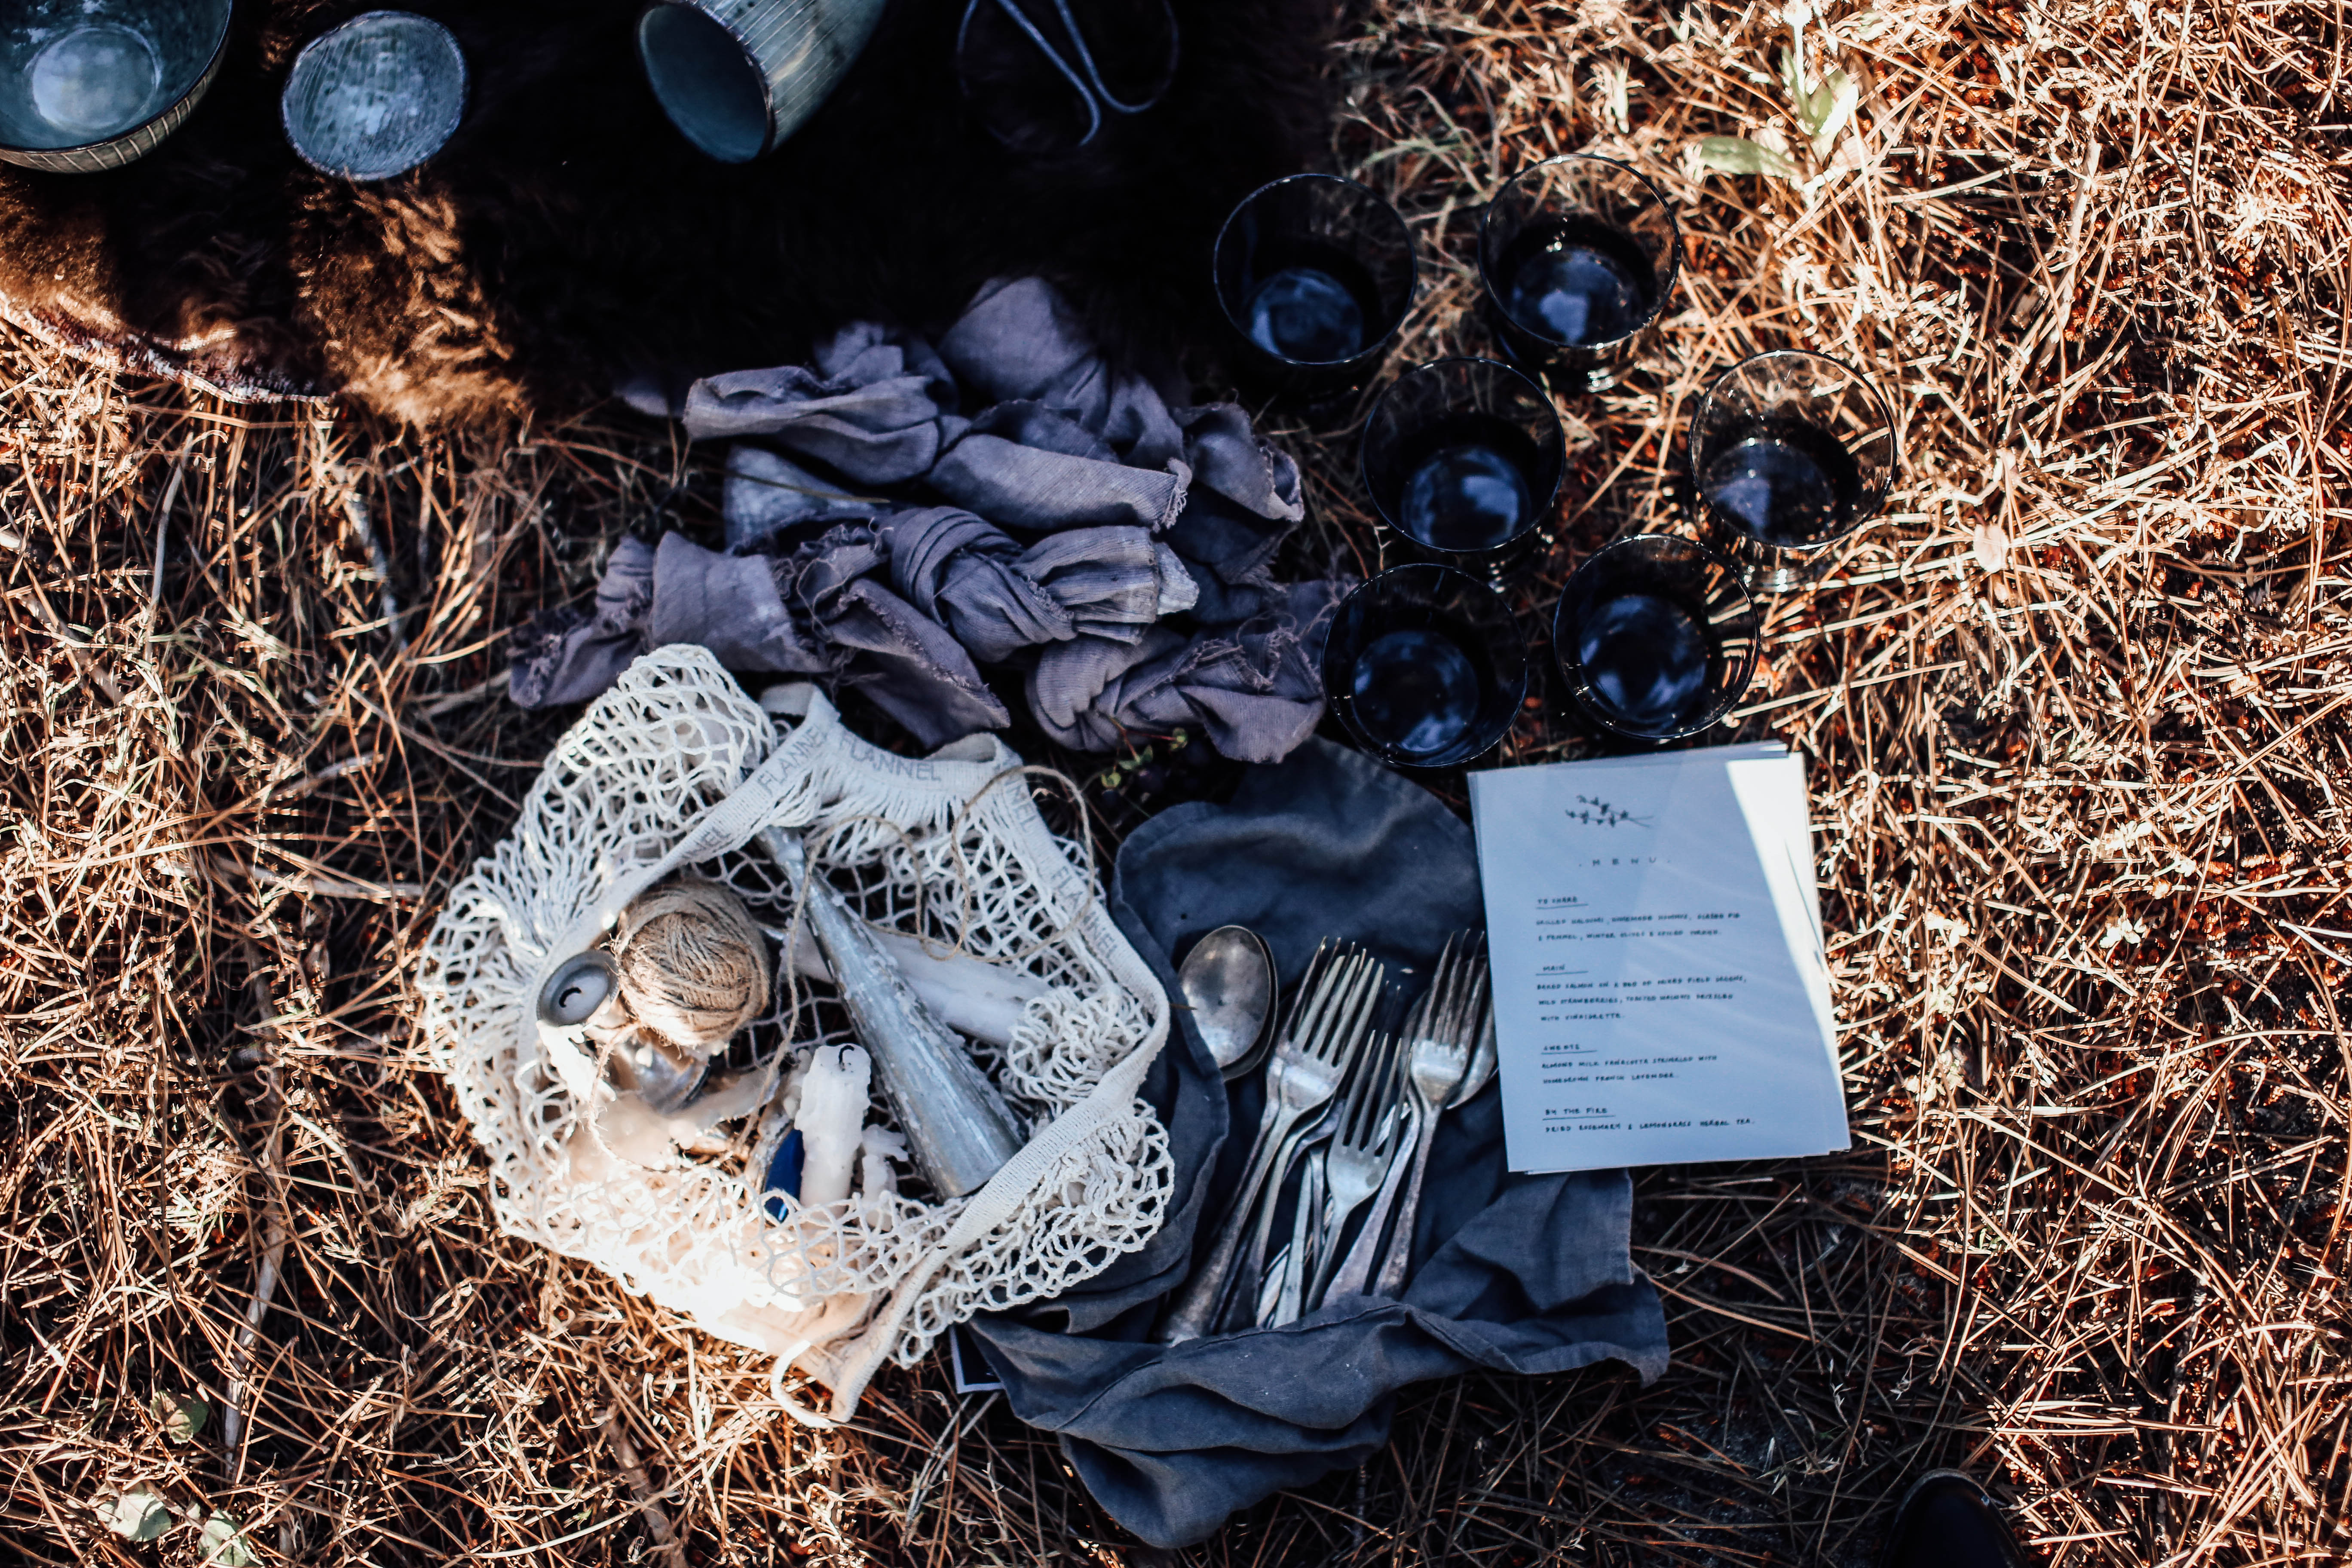 Napkins and reusable bag near cutlery and glasses on grass